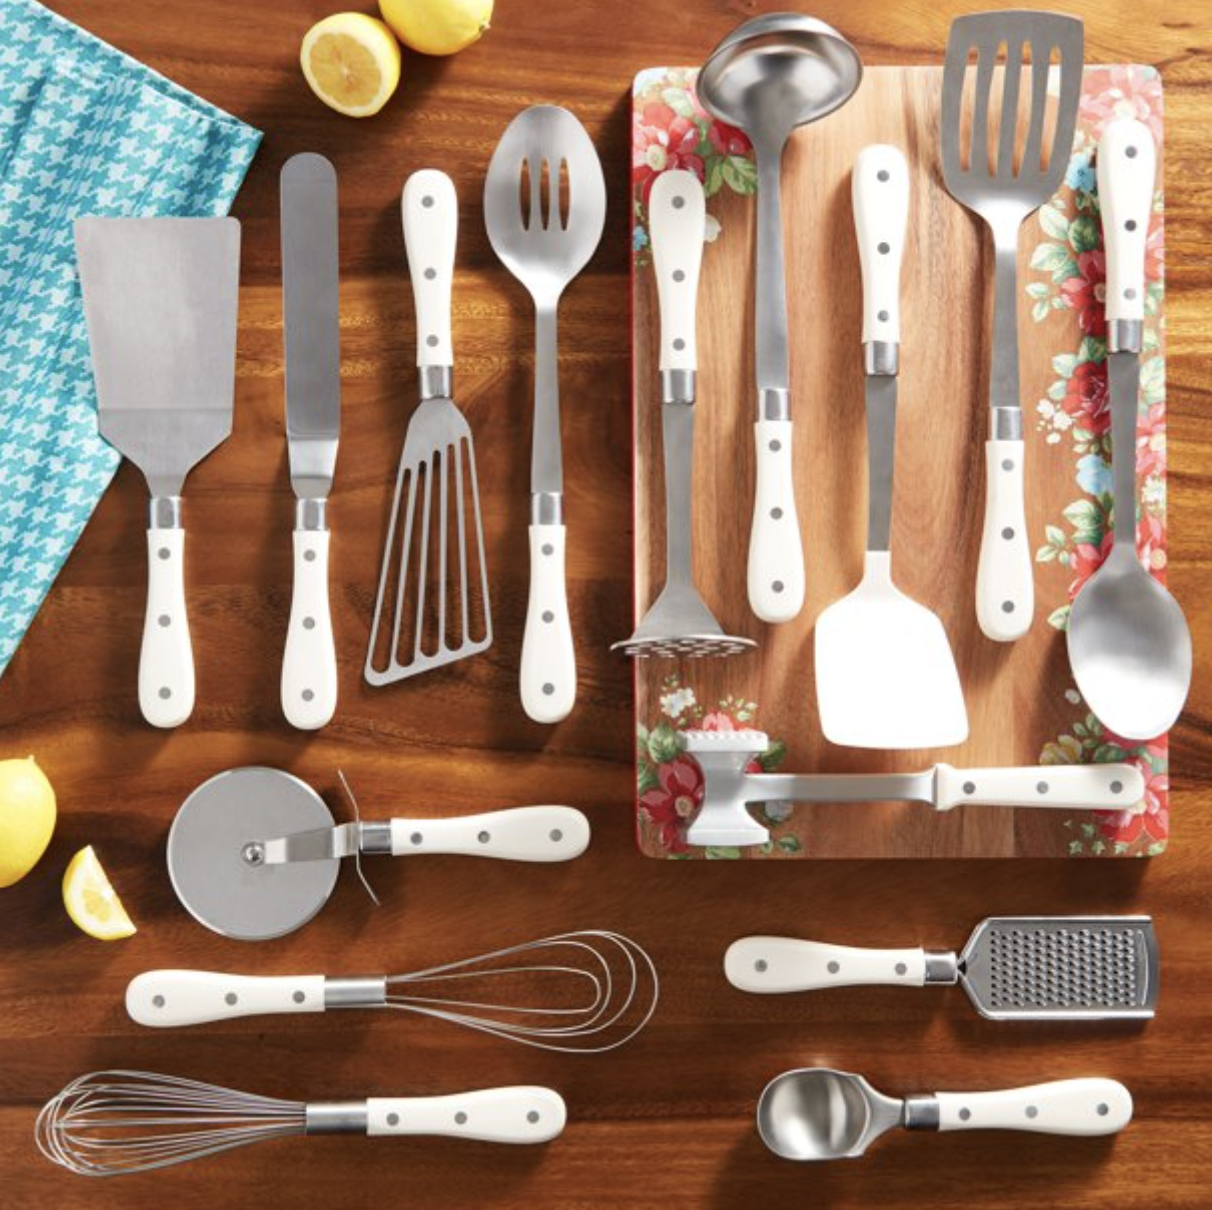 The 15-piece set by The Pioneer Woman comes equipped with every kitchen utensil you'll need. (Photo: Walmart)